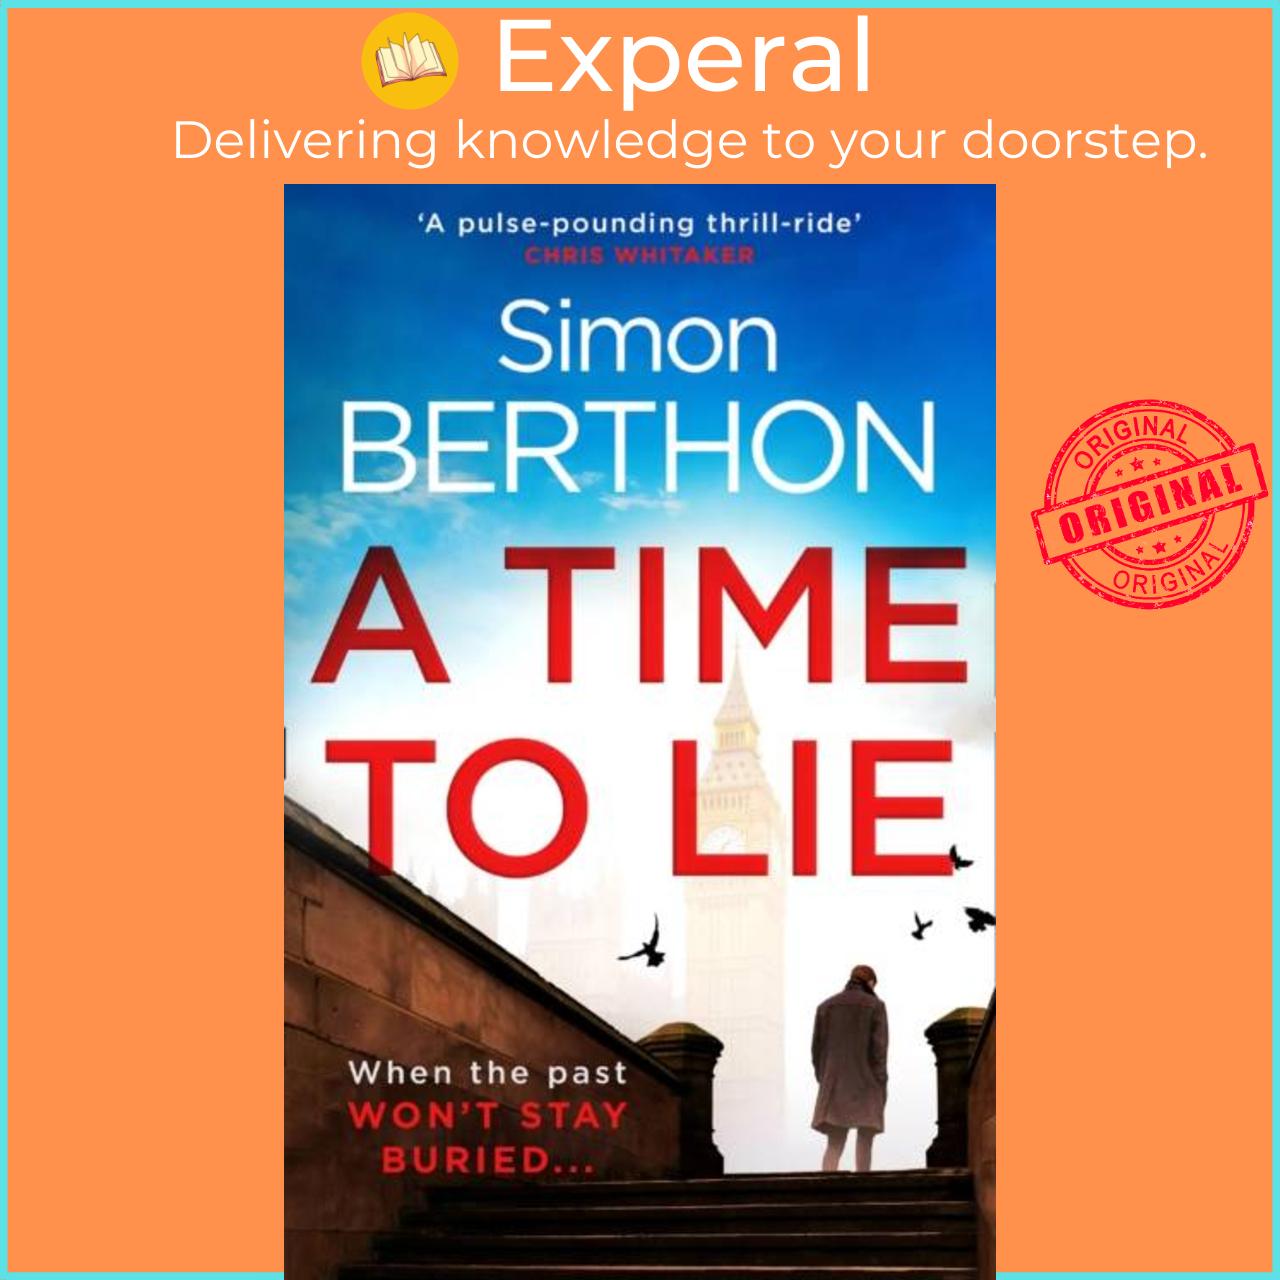 Sách - A Time to Lie by Simon Berthon (UK edition, hardcover)